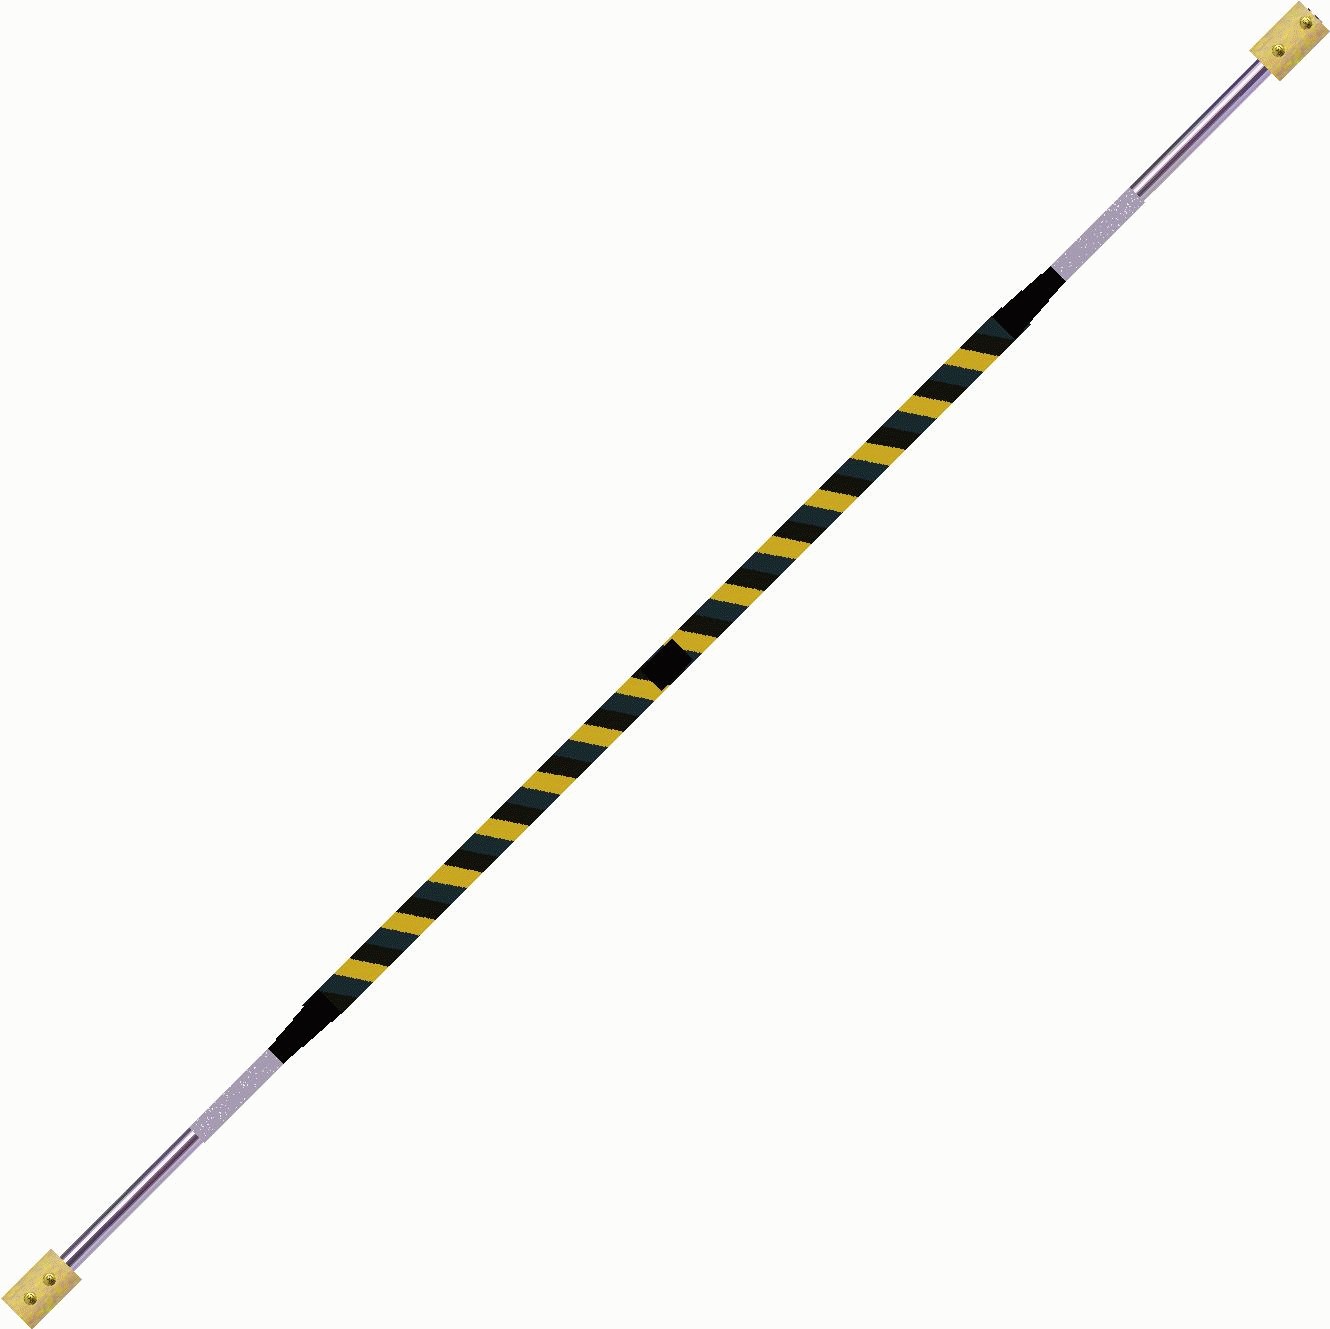 Contact Fire Staff  166cm  65mm    90cm   Yellow    